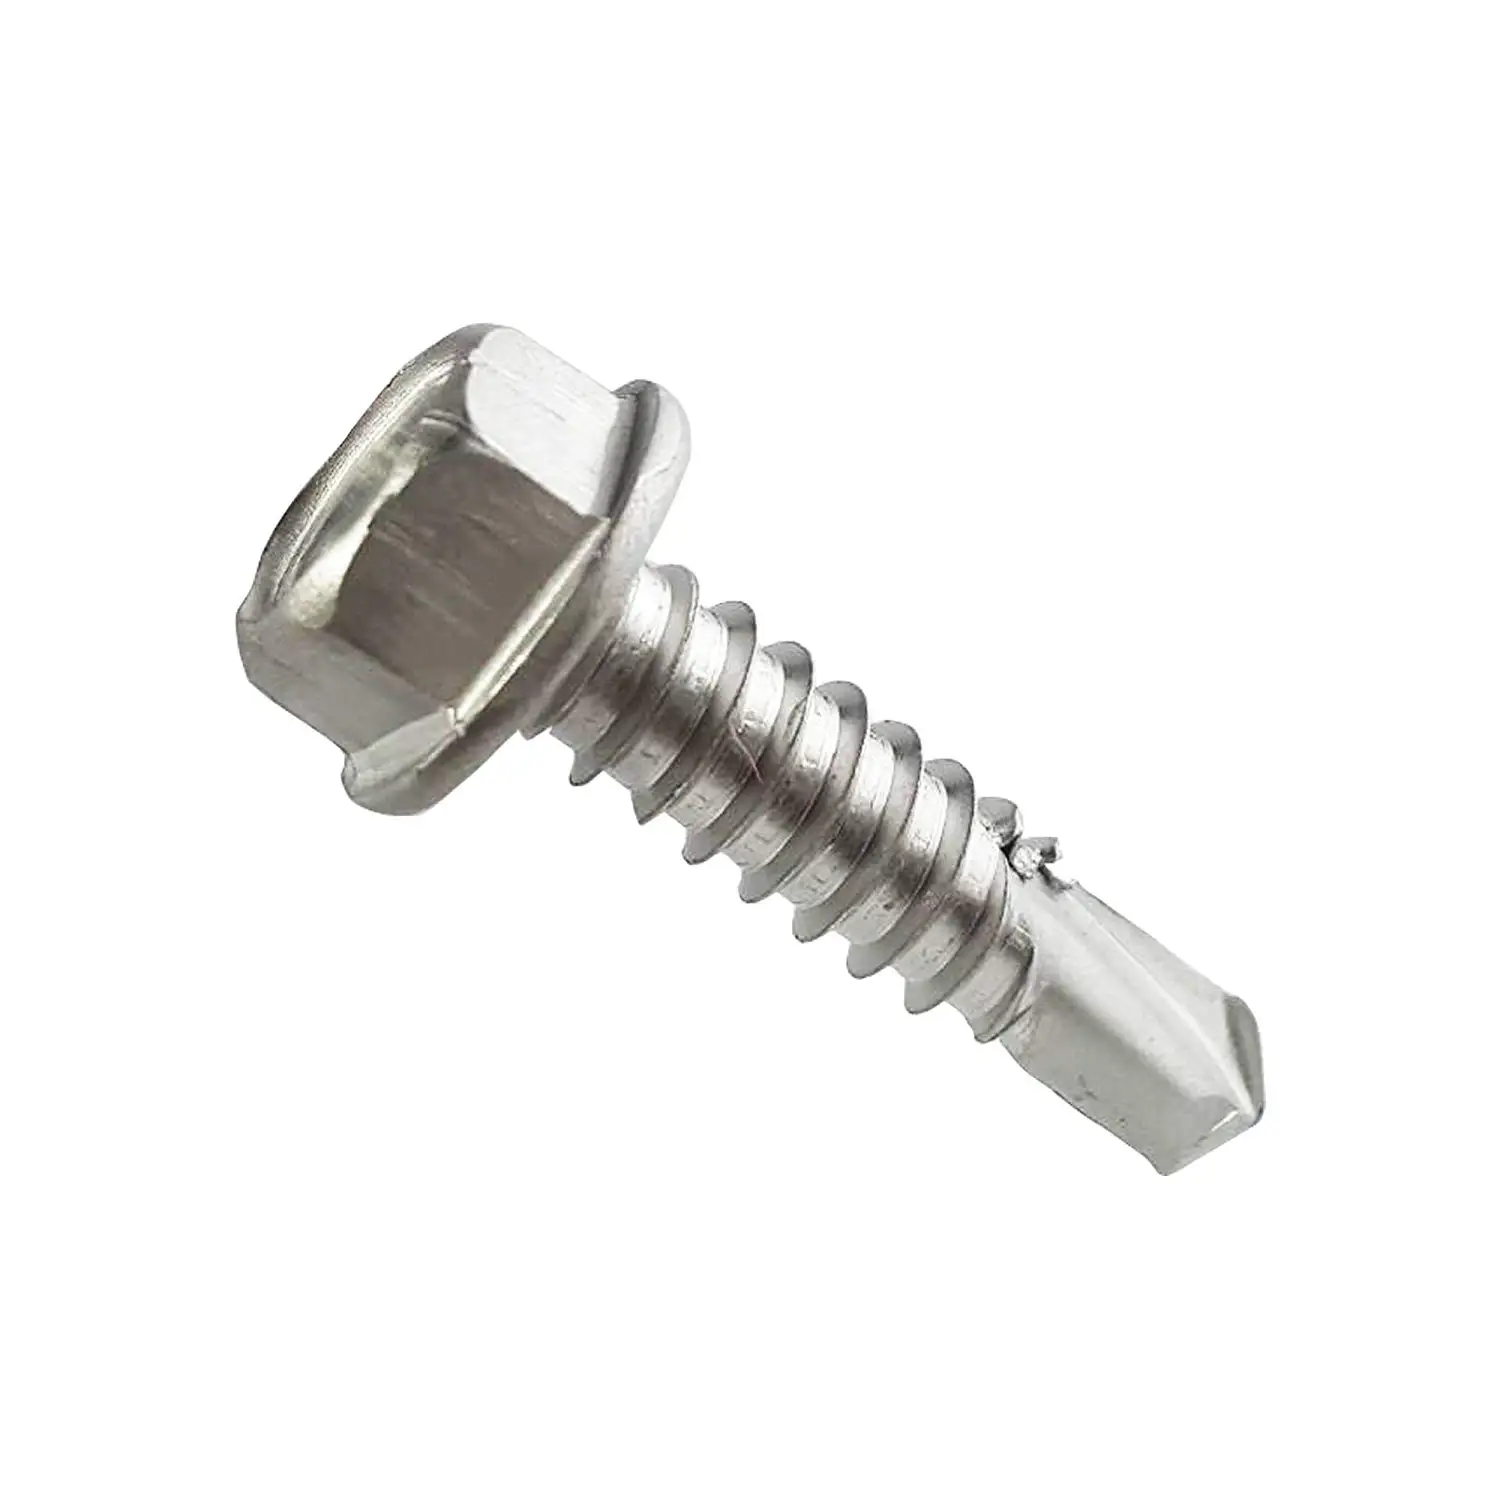 Pack of 10000 Hex Drive Zinc Plated Finish Pack of 10000 3/4 Length 3/4 Length #2 Drill Point Hex Washer Head #6-20 Thread Size Steel Self-Drilling Screw Small Parts 0612KW 